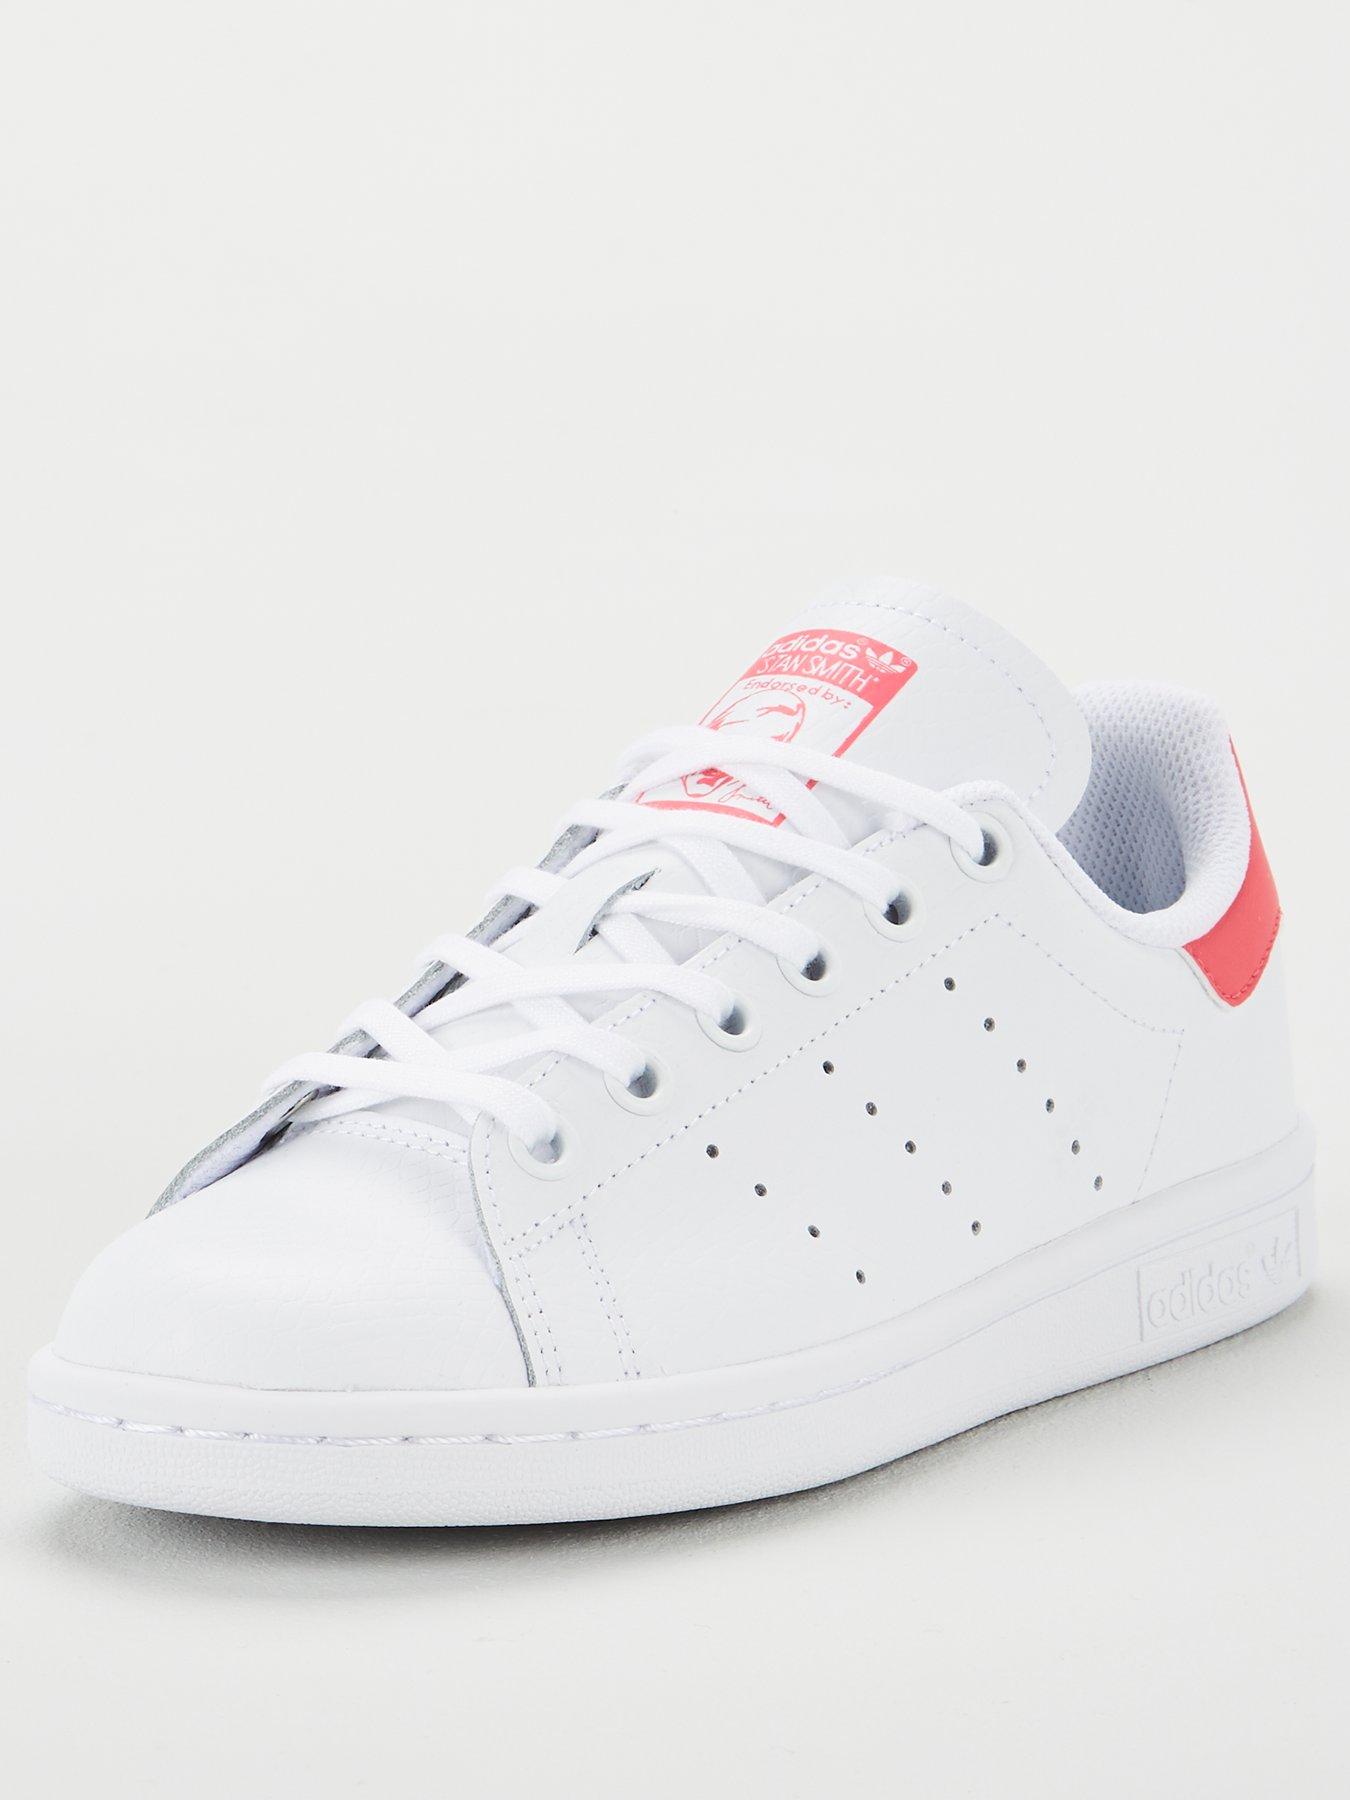 adidas originals stan smith trainers in white and pink